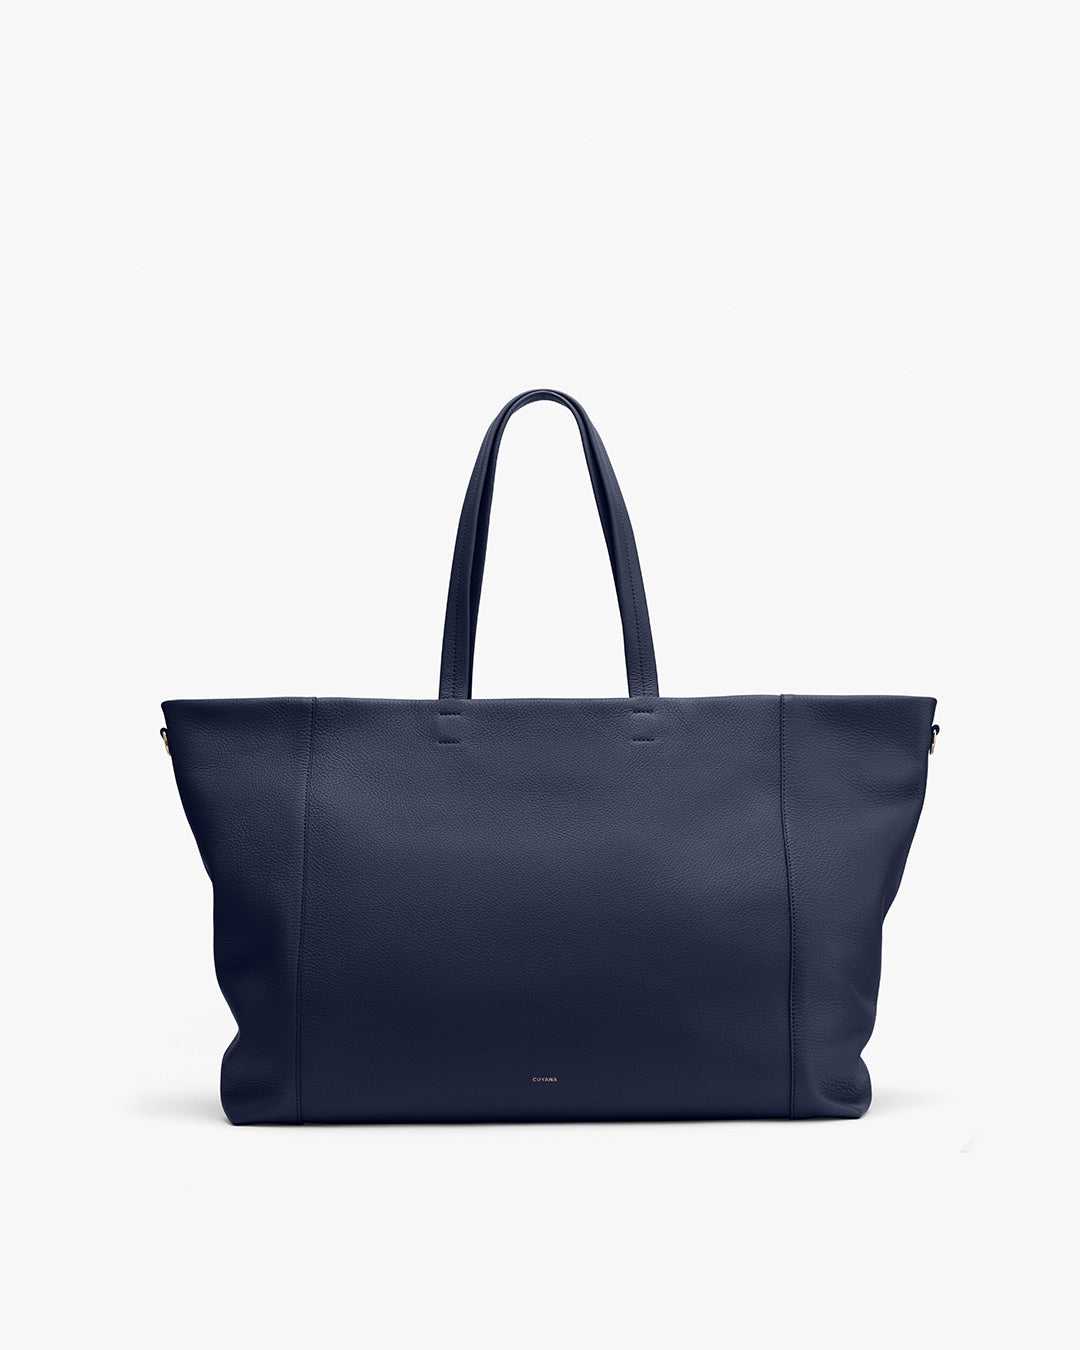 Women's Easy Travel Tote Bag in Navy | Pebbled Leather by Cuyana